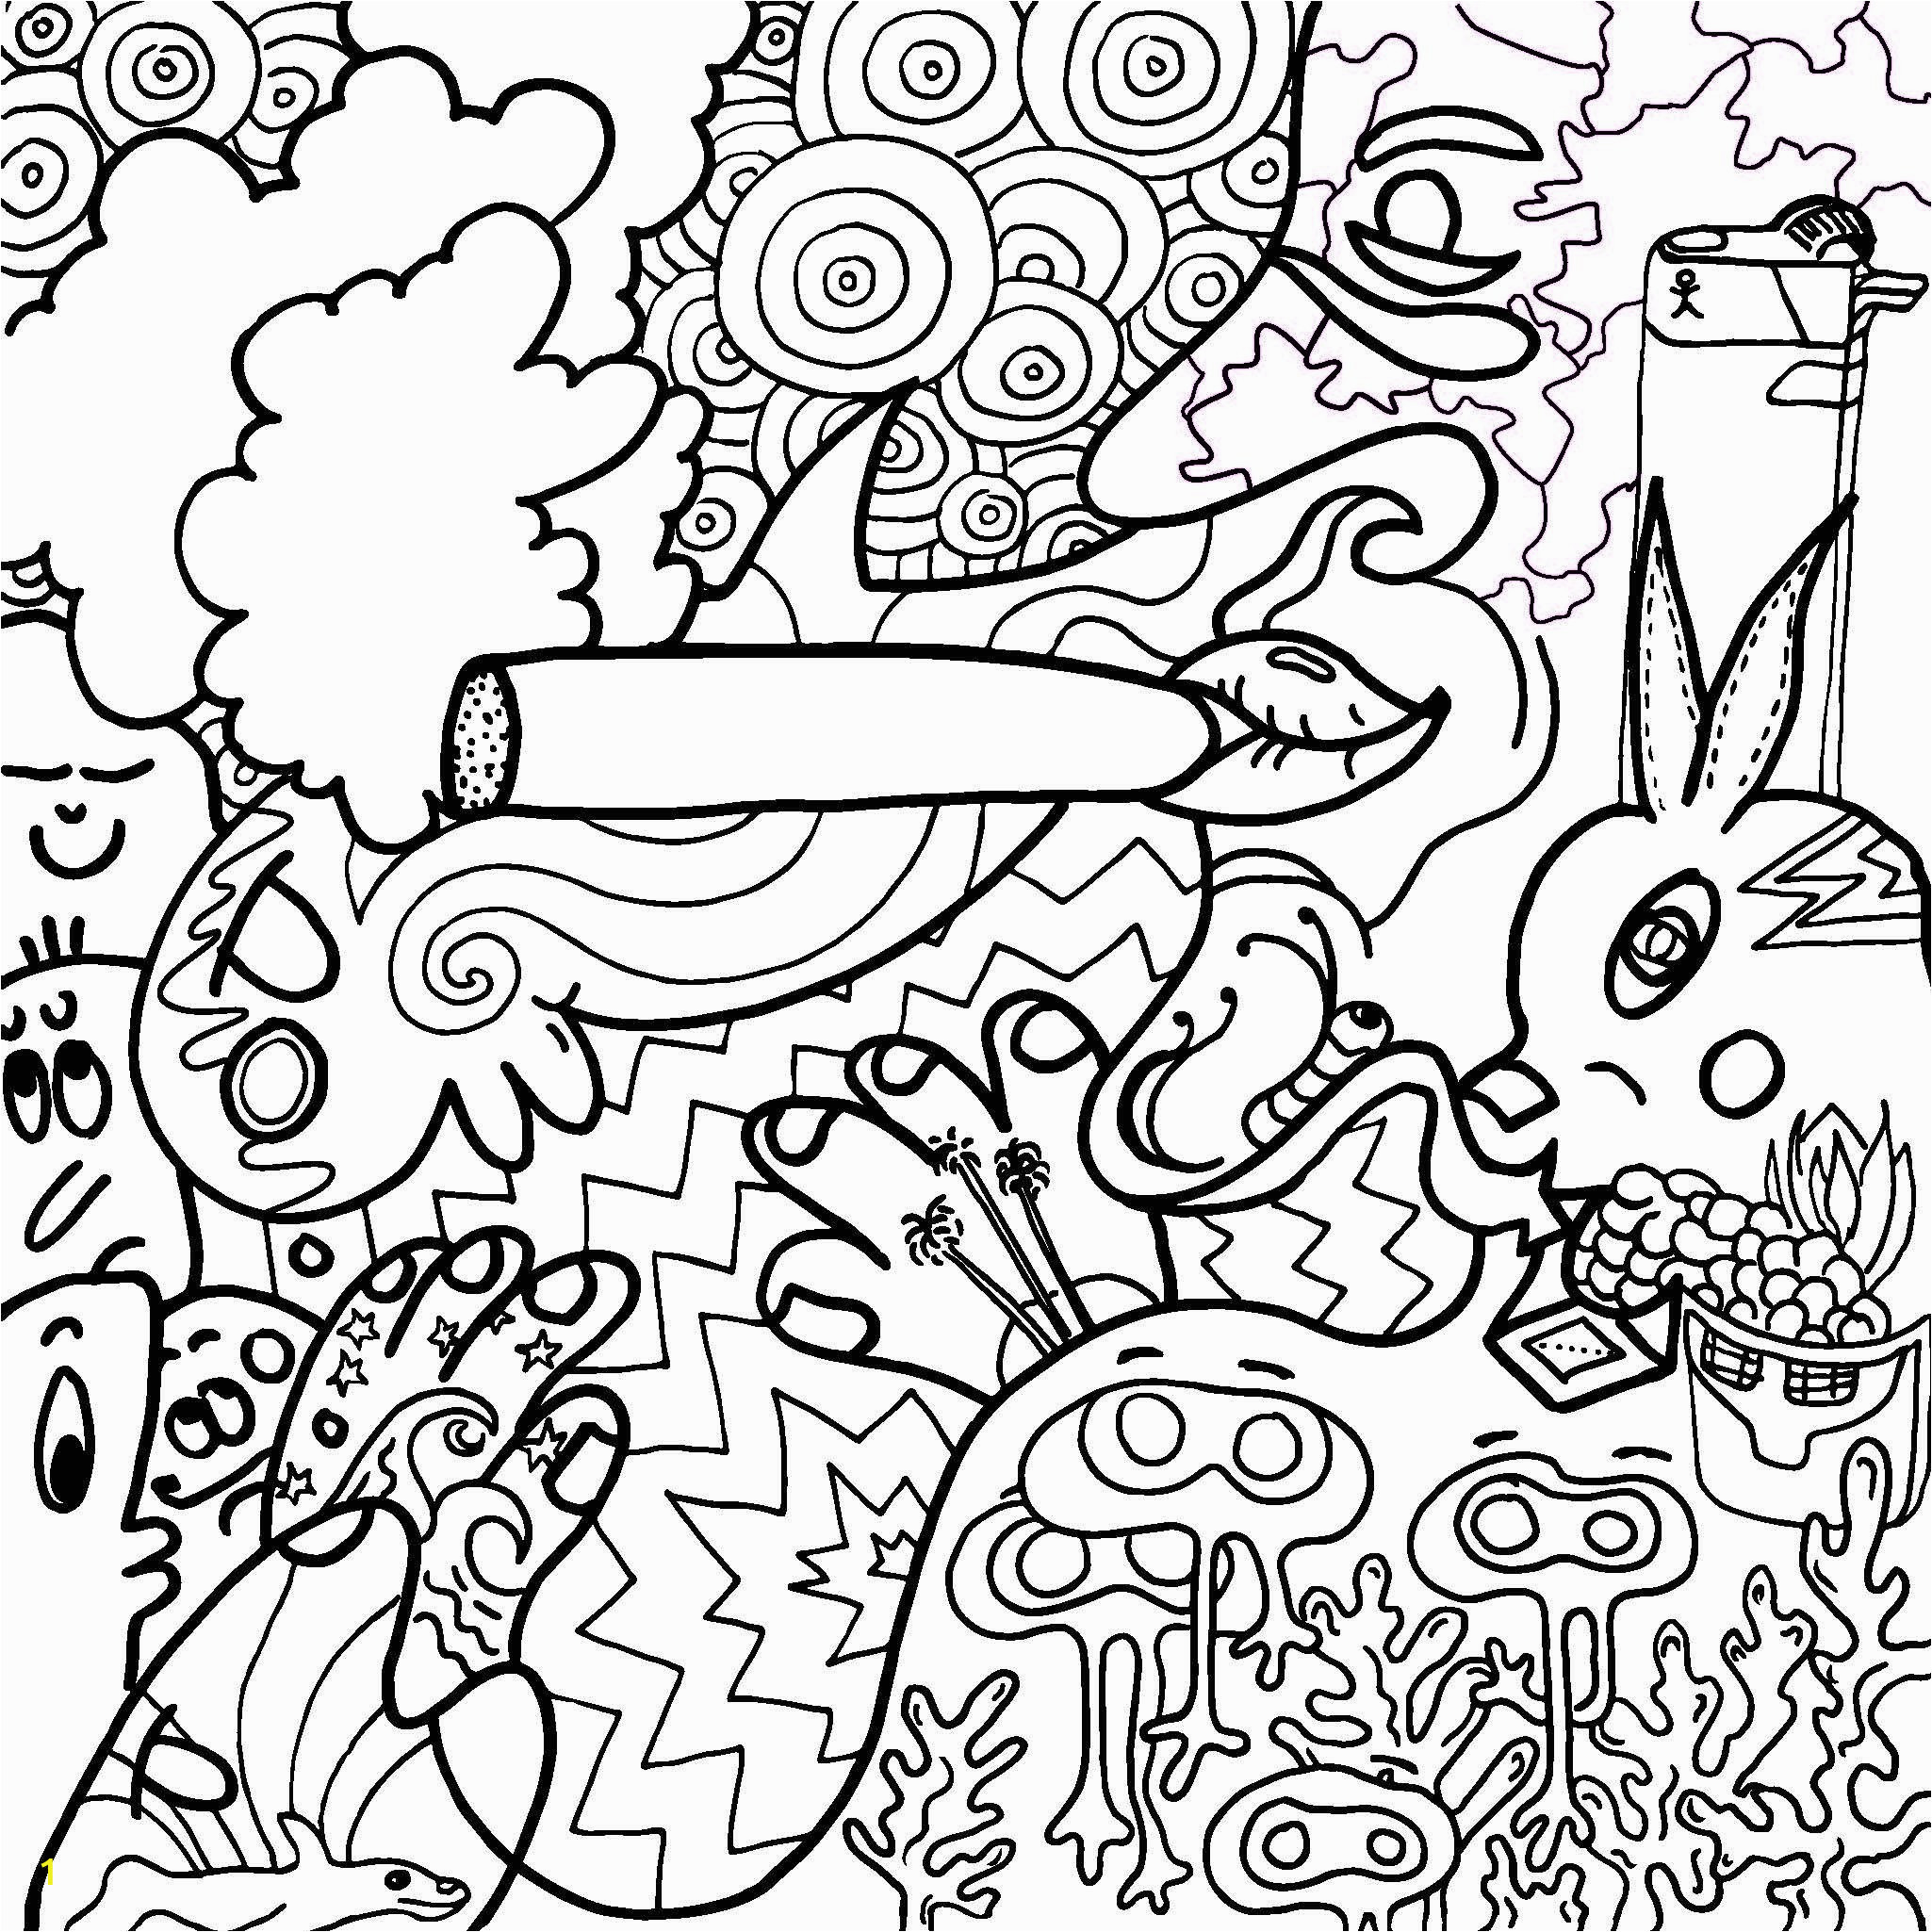 Stoner Inappropriate Coloring Pages for Adults Stoner Drawing at Getdrawings